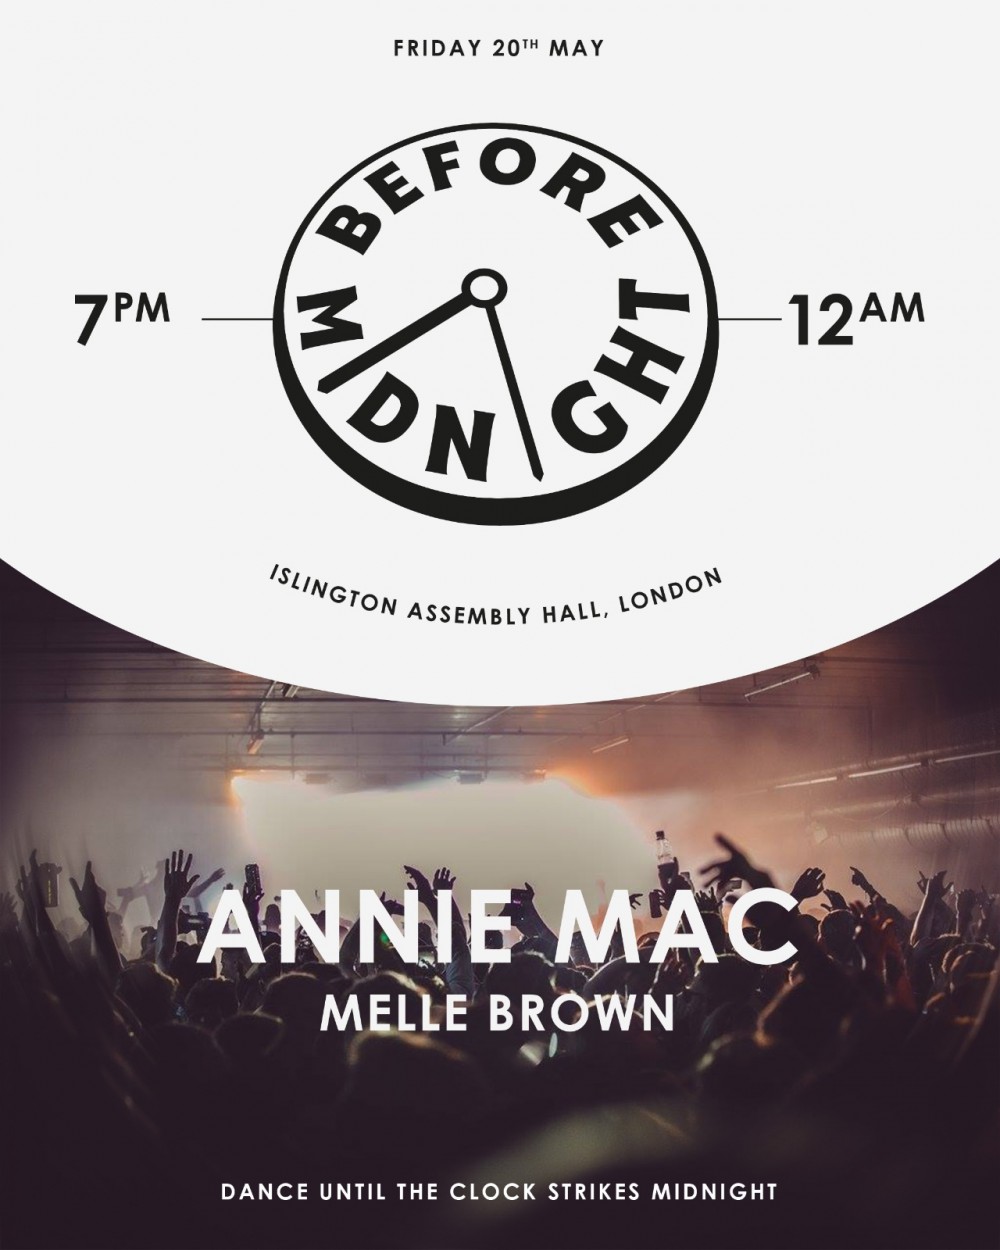 Annie Mac Plans Club Night for People Who Don’t Want Sleepless Nights